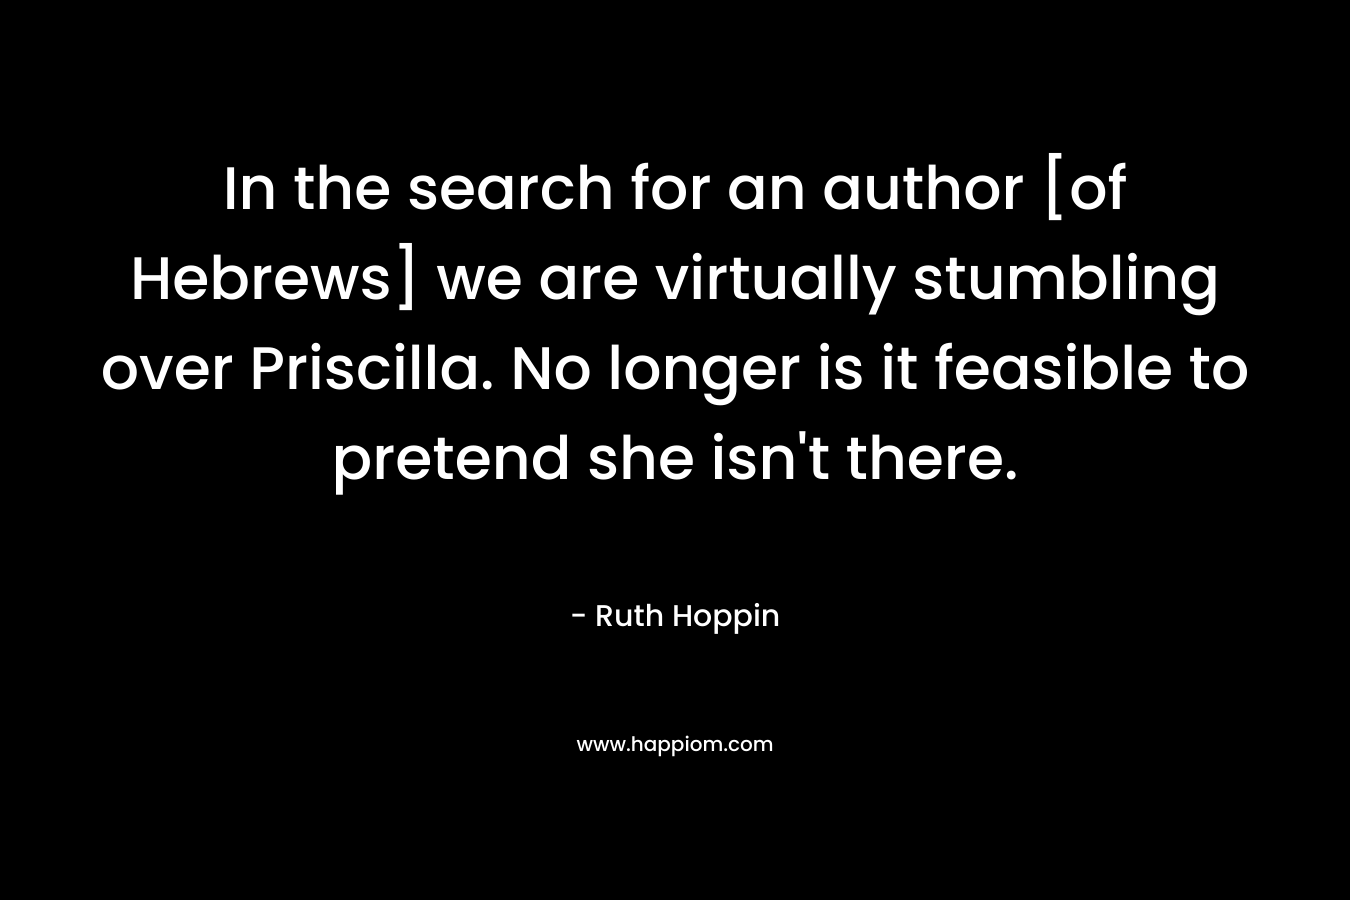 In the search for an author [of Hebrews] we are virtually stumbling over Priscilla. No longer is it feasible to pretend she isn't there.